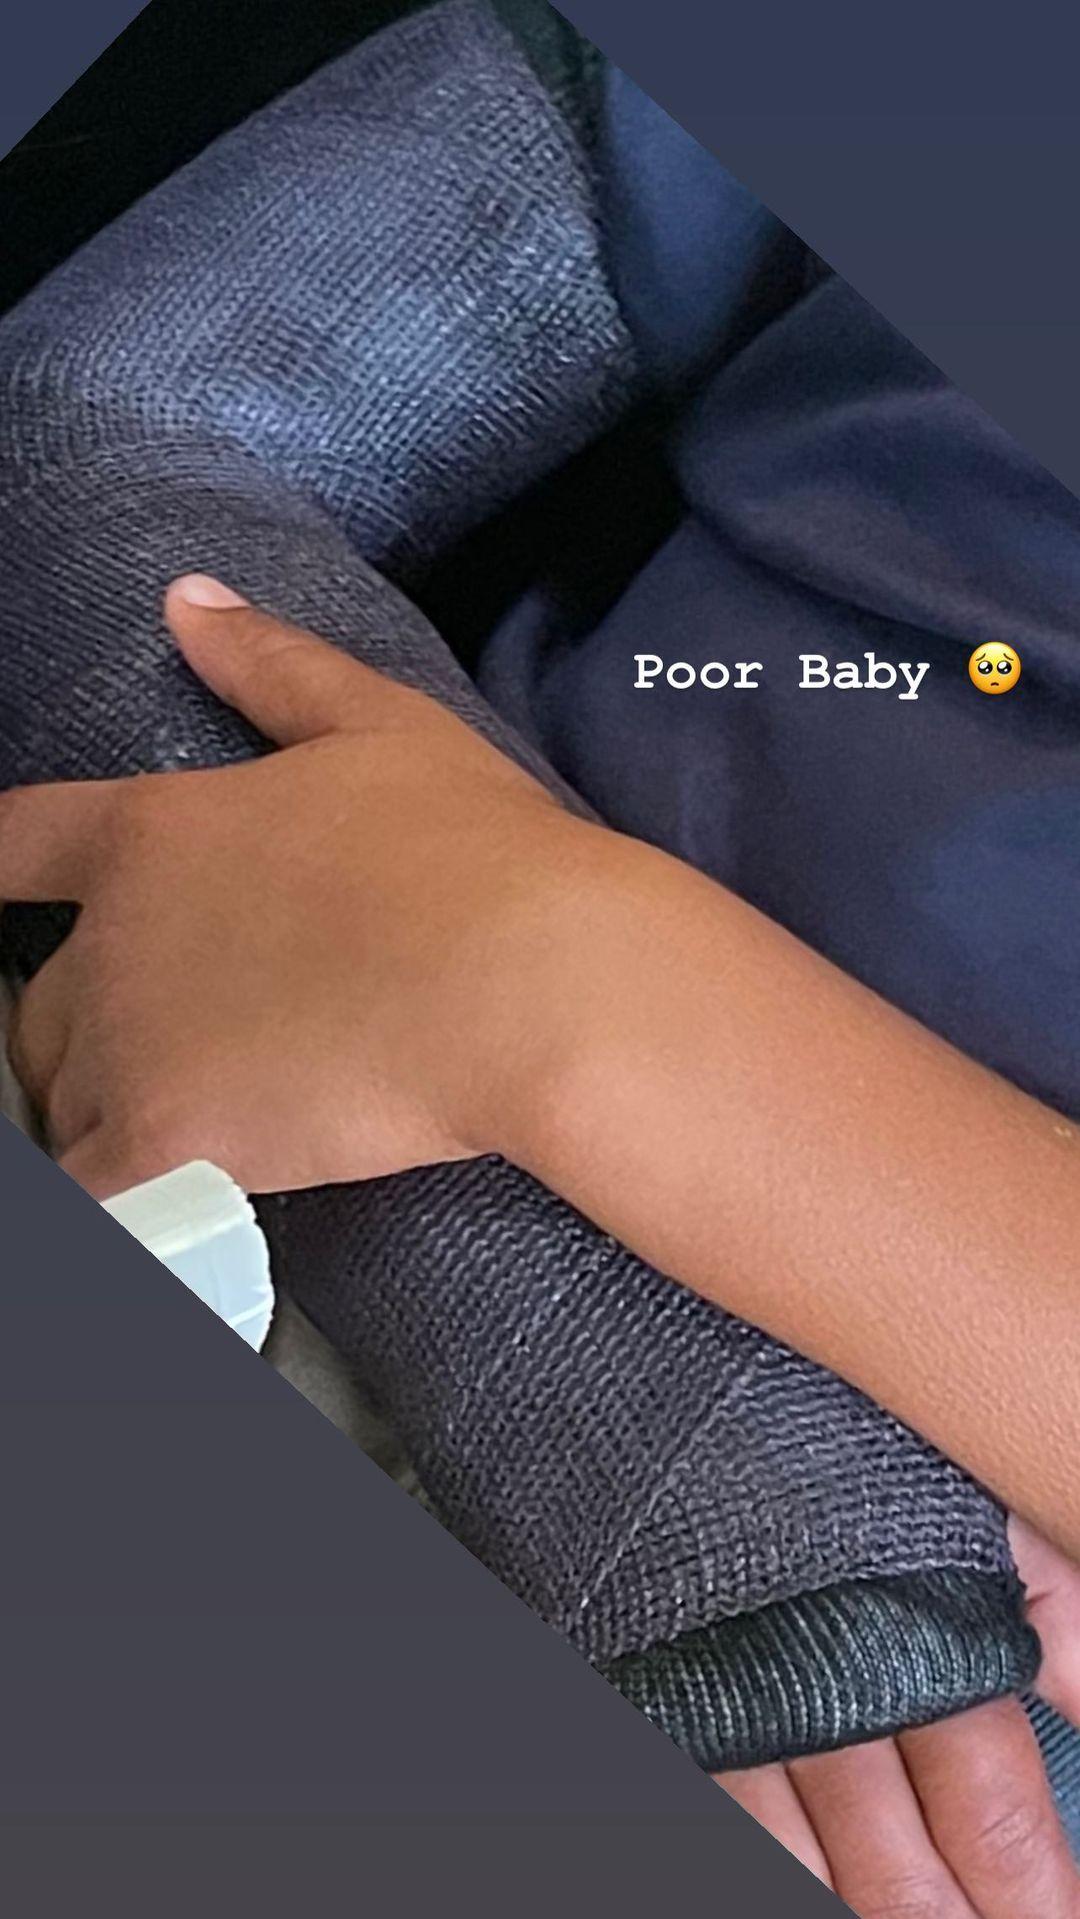 Kim Kardashian's Son Hospitalized After Breaking Arm In Several Places